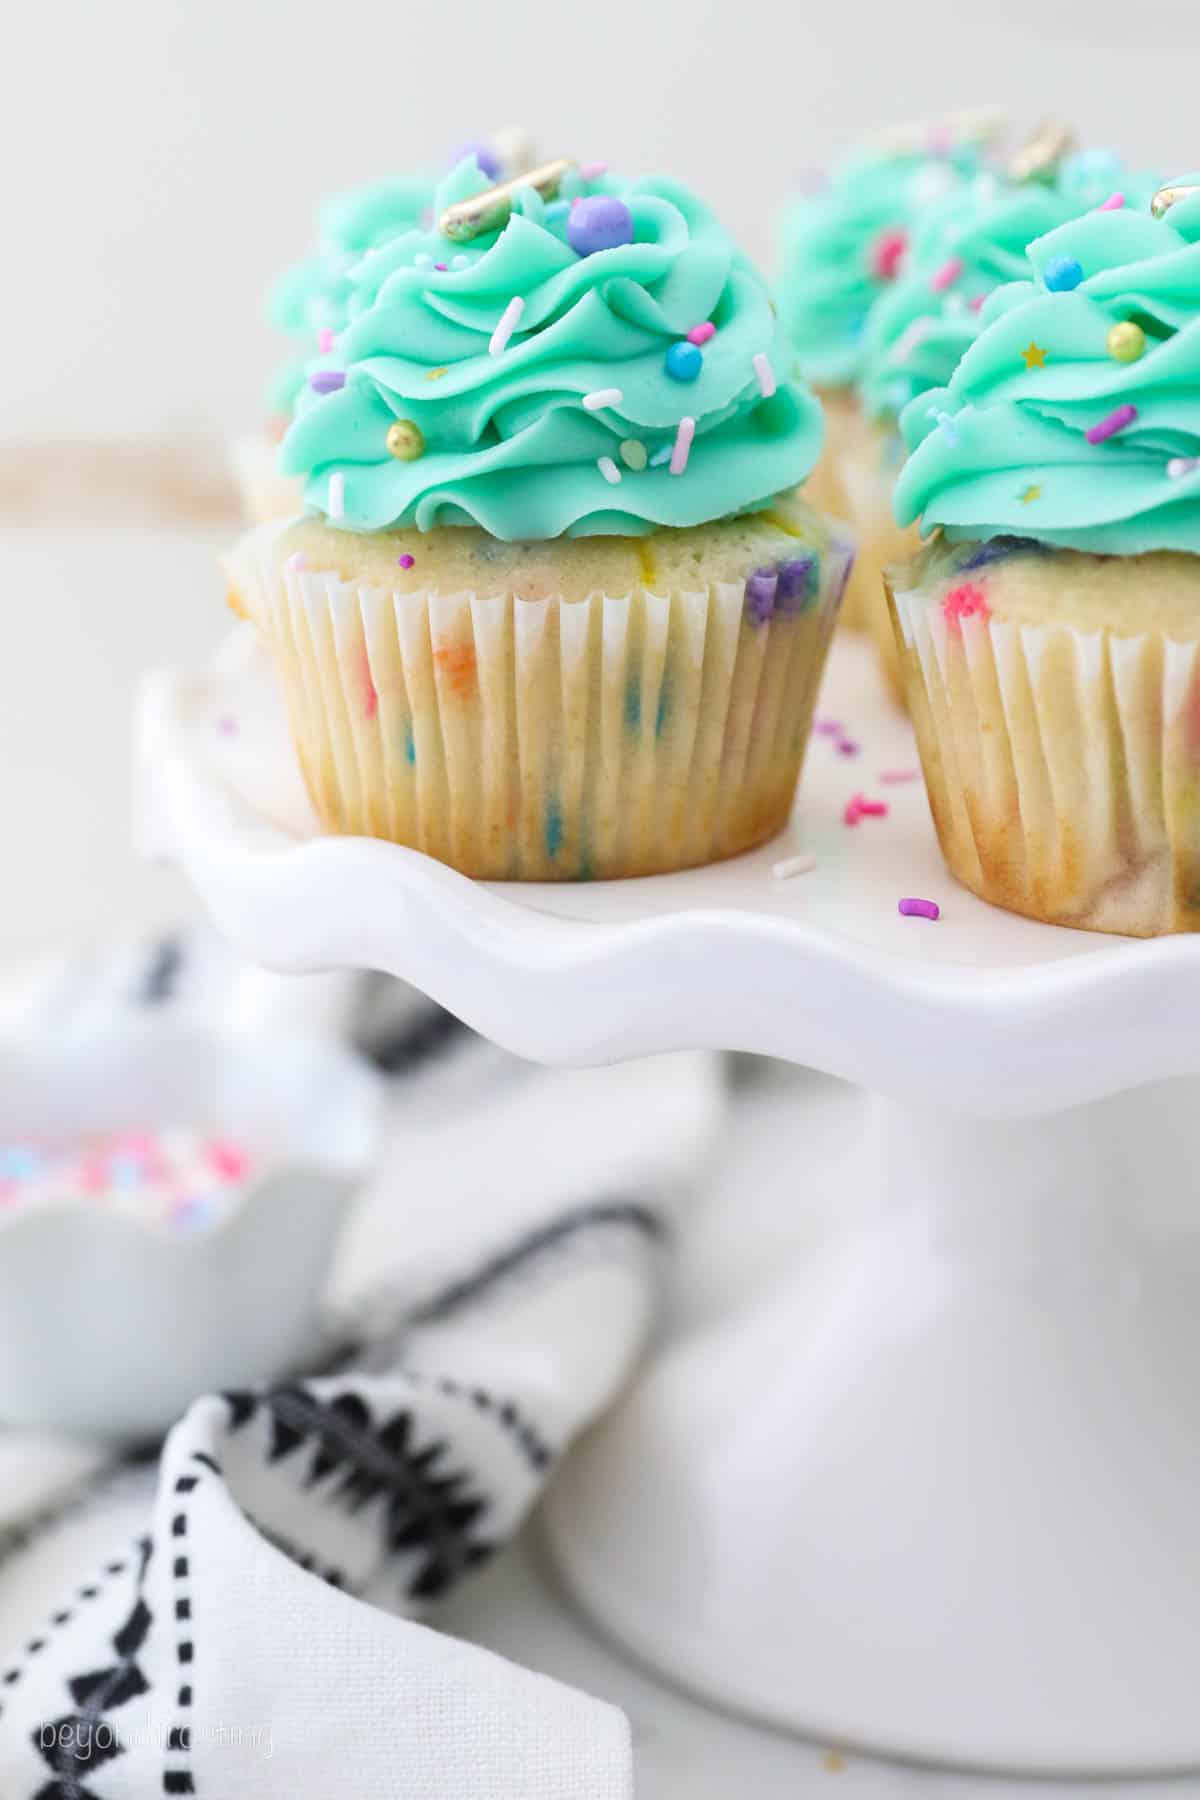 Funfetti cupcakes frosted with teal buttercream swirls and sprinkles on a white cake stand.